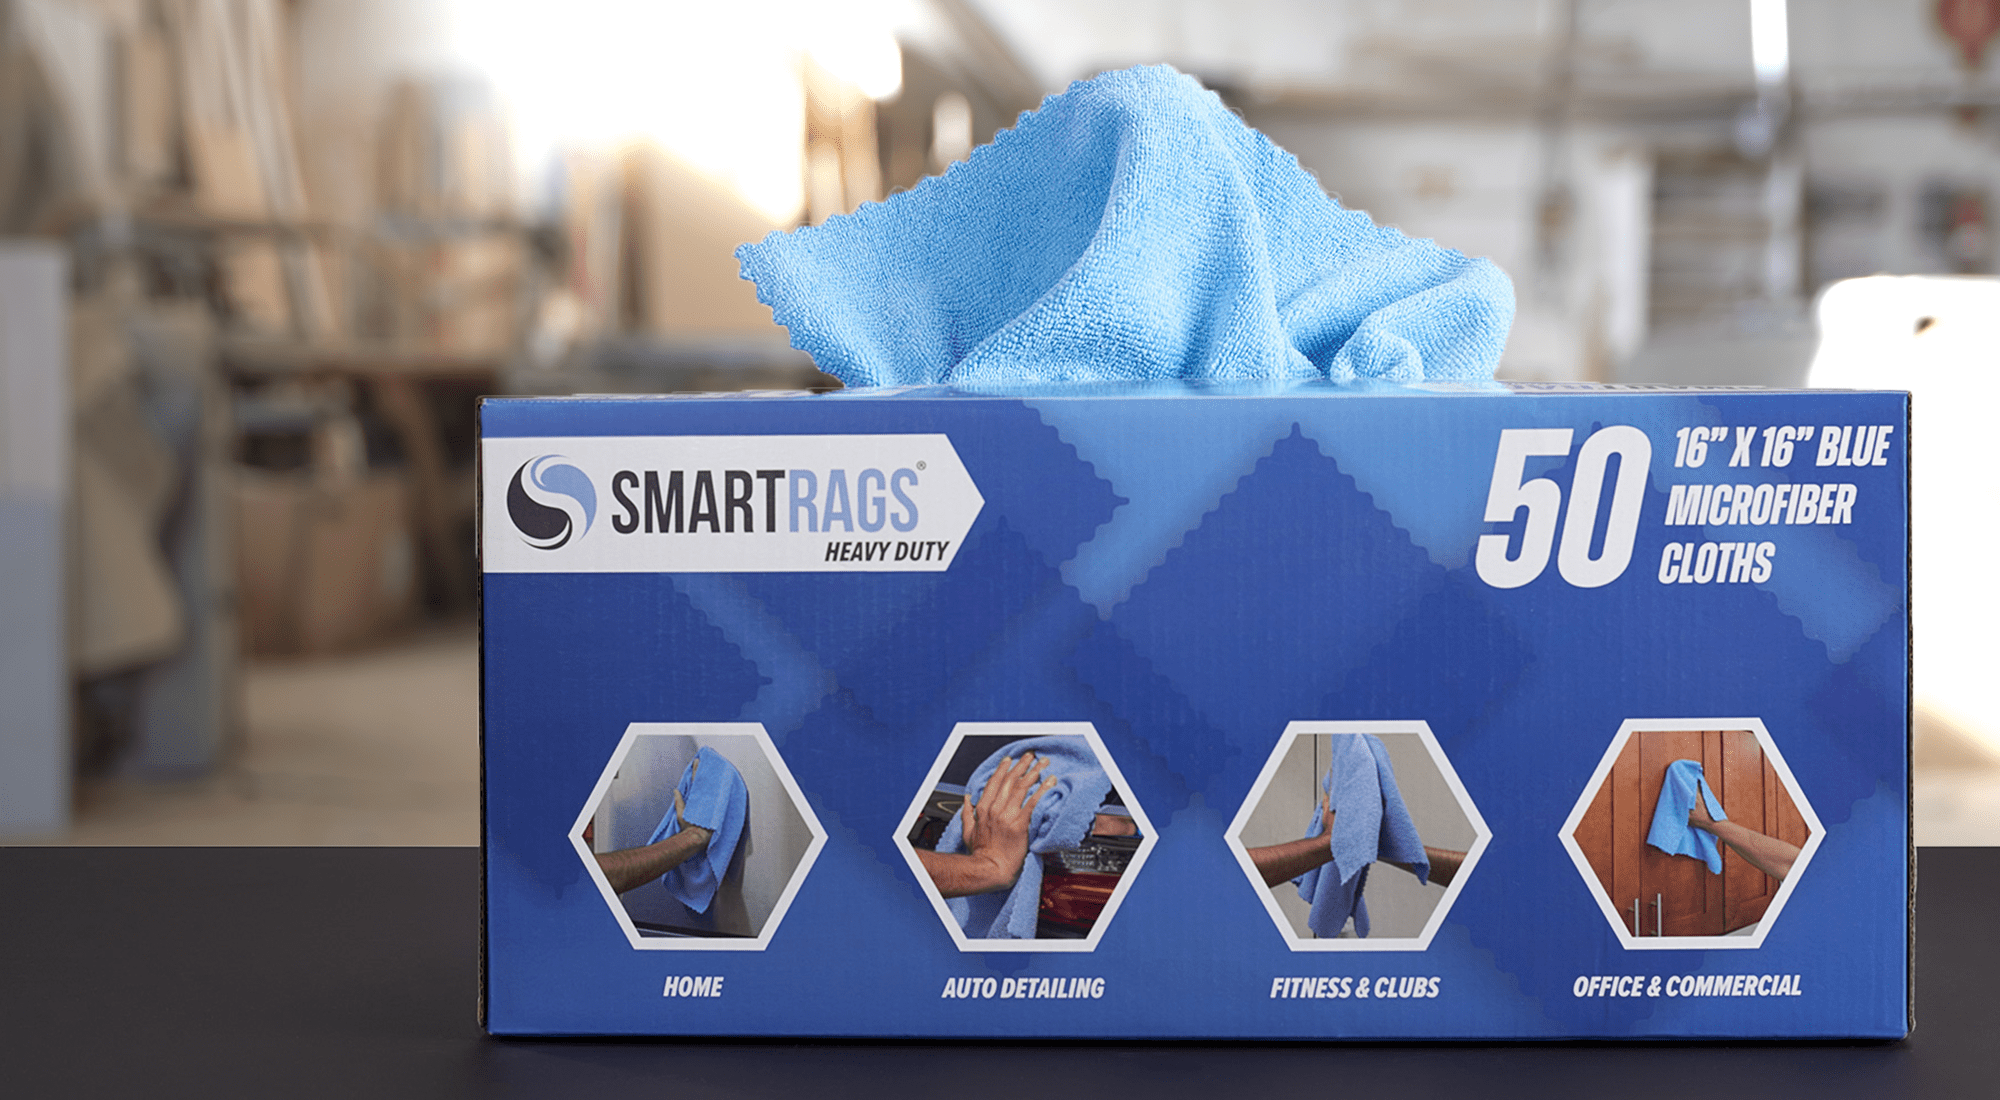 Introducing SmartRags Heavy Duty.